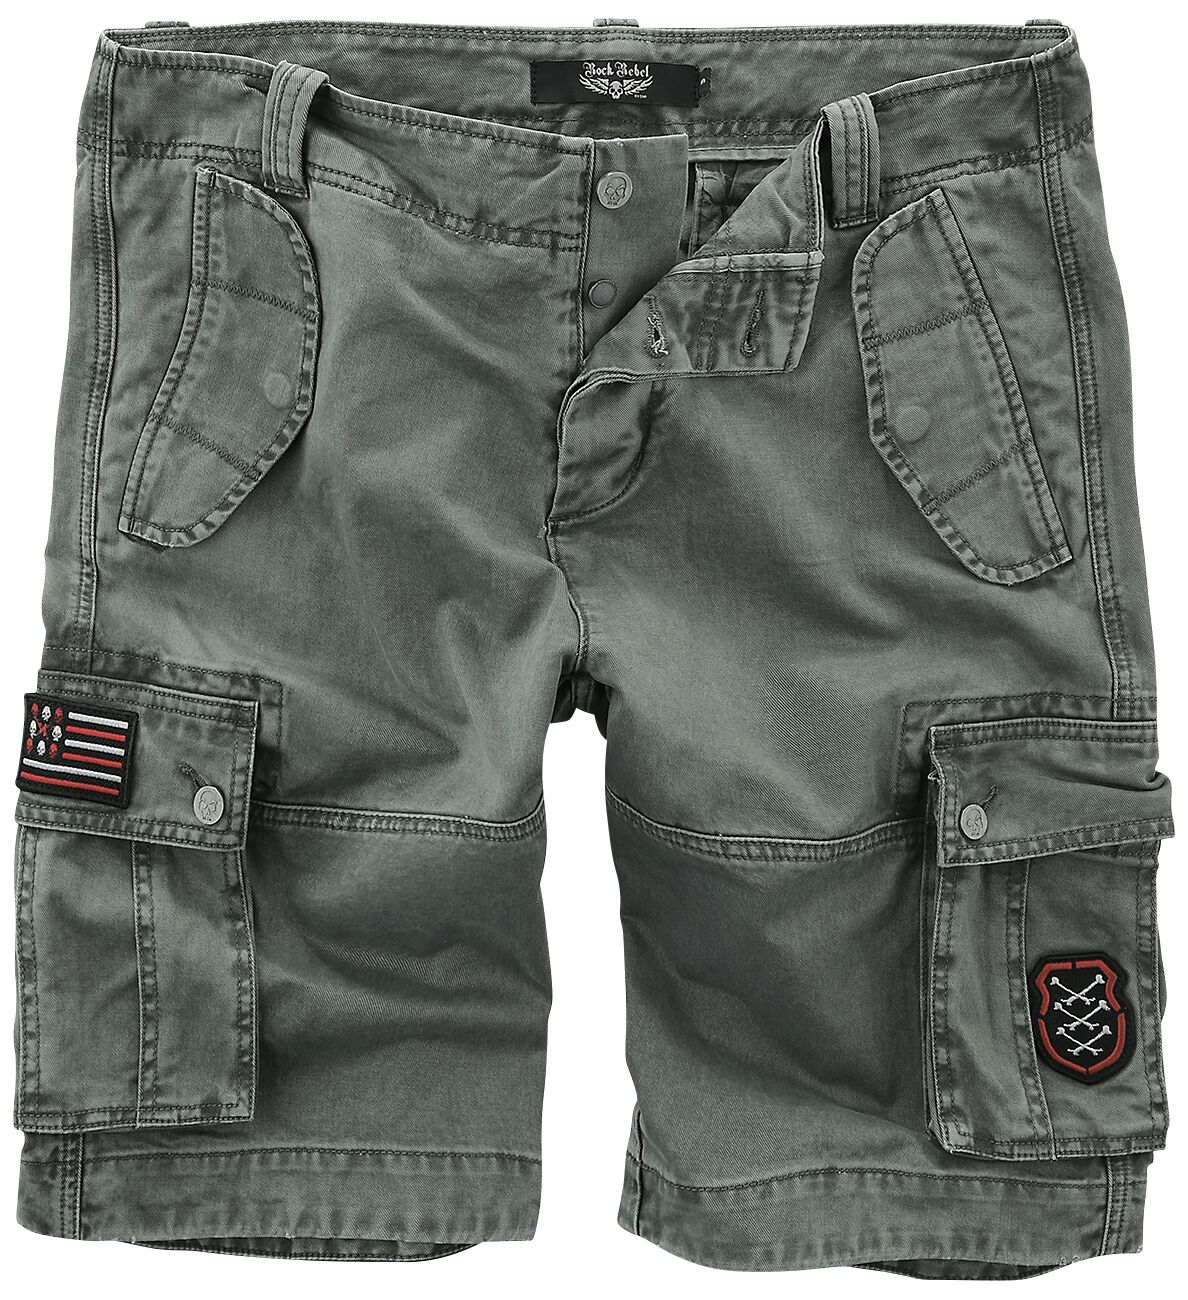 Image of Shorts di Rock Rebel by EMP - Grey Cargo Shorts with Patches - S a XXL - Uomo - grigio